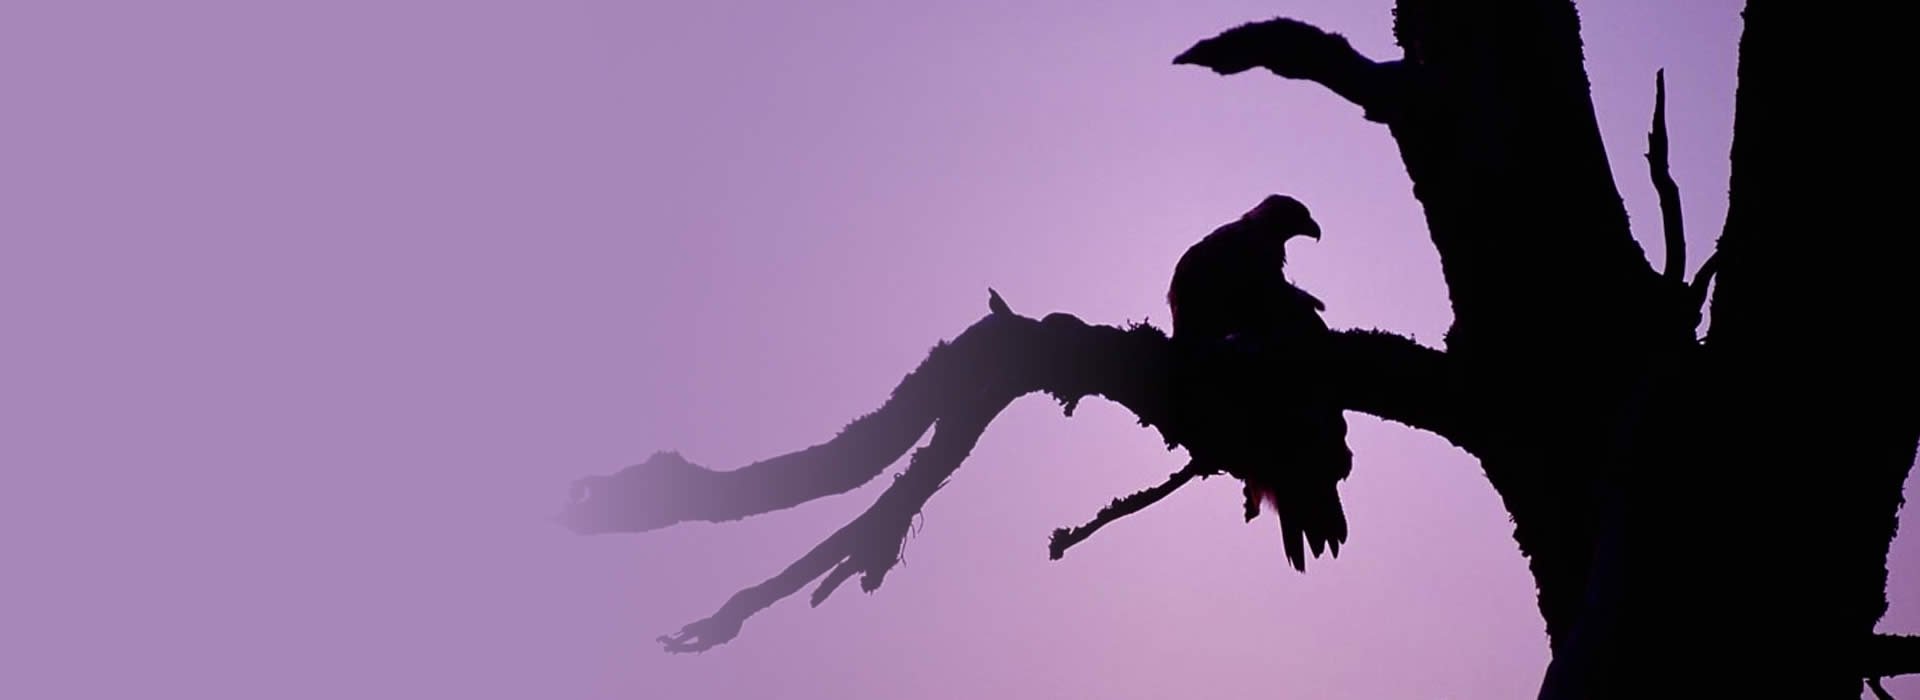 Eagle silhouette - Laurie Campbell